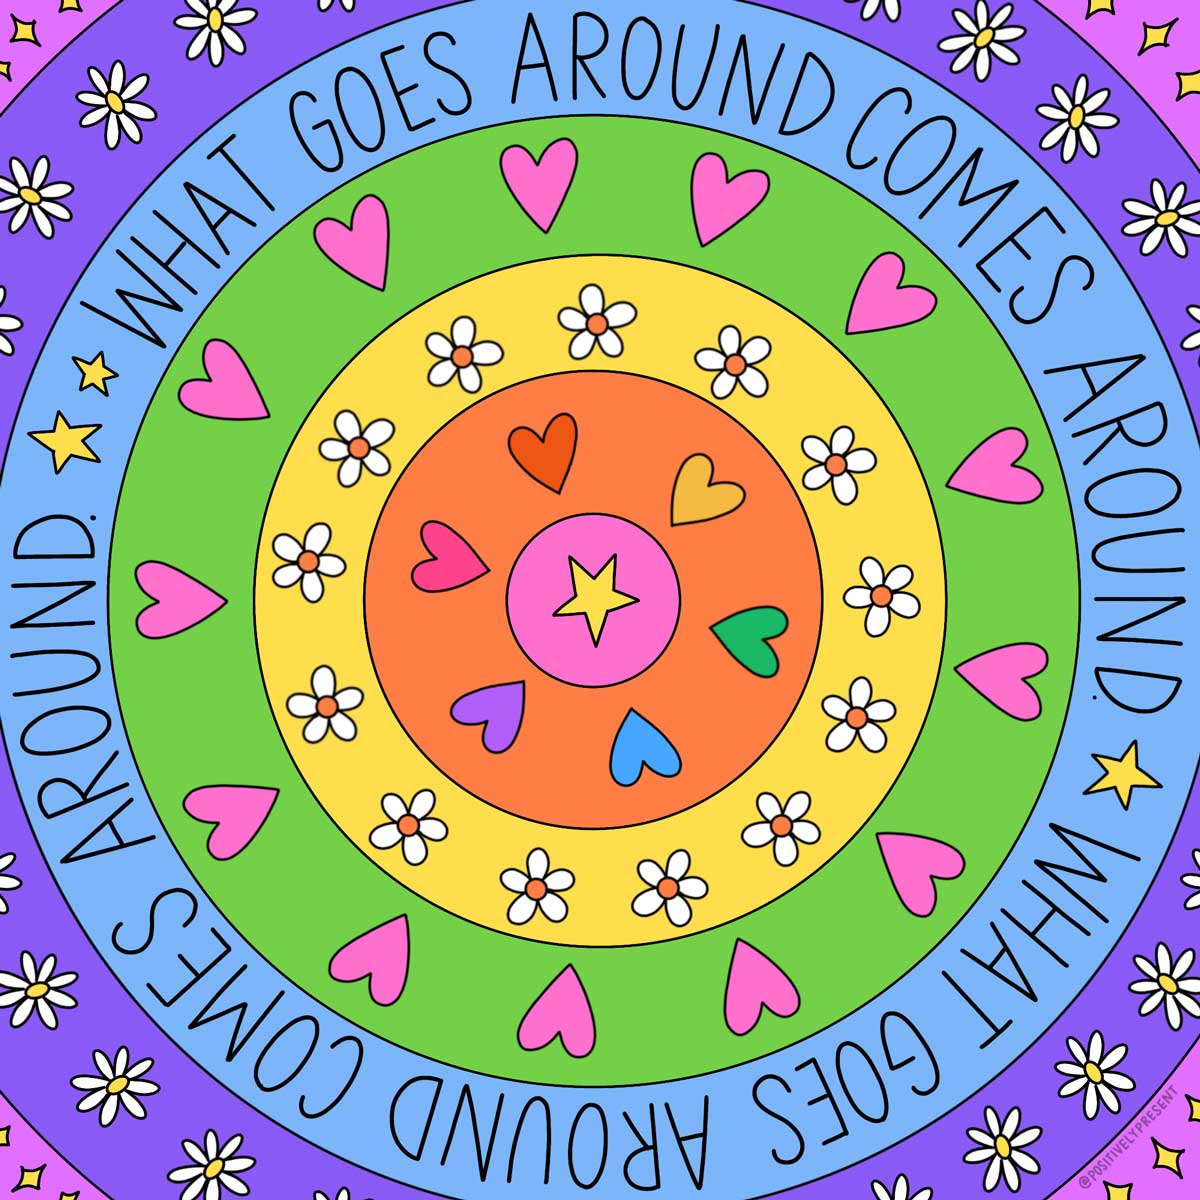 colorful mandala style art says what goes around comes around.